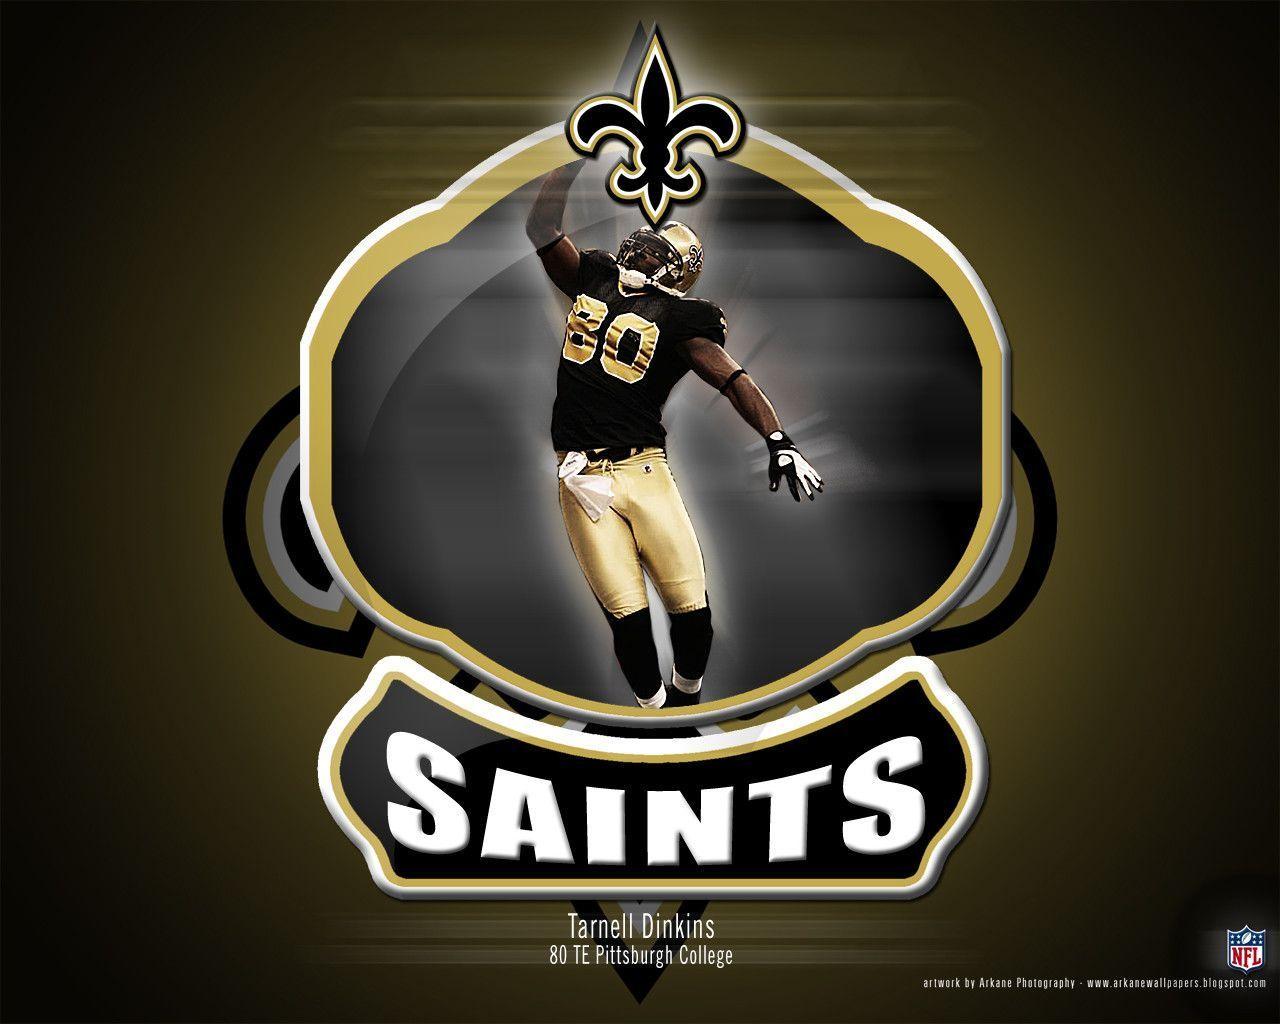 Free New Orleans Saints wallpaper background image. New Orleans